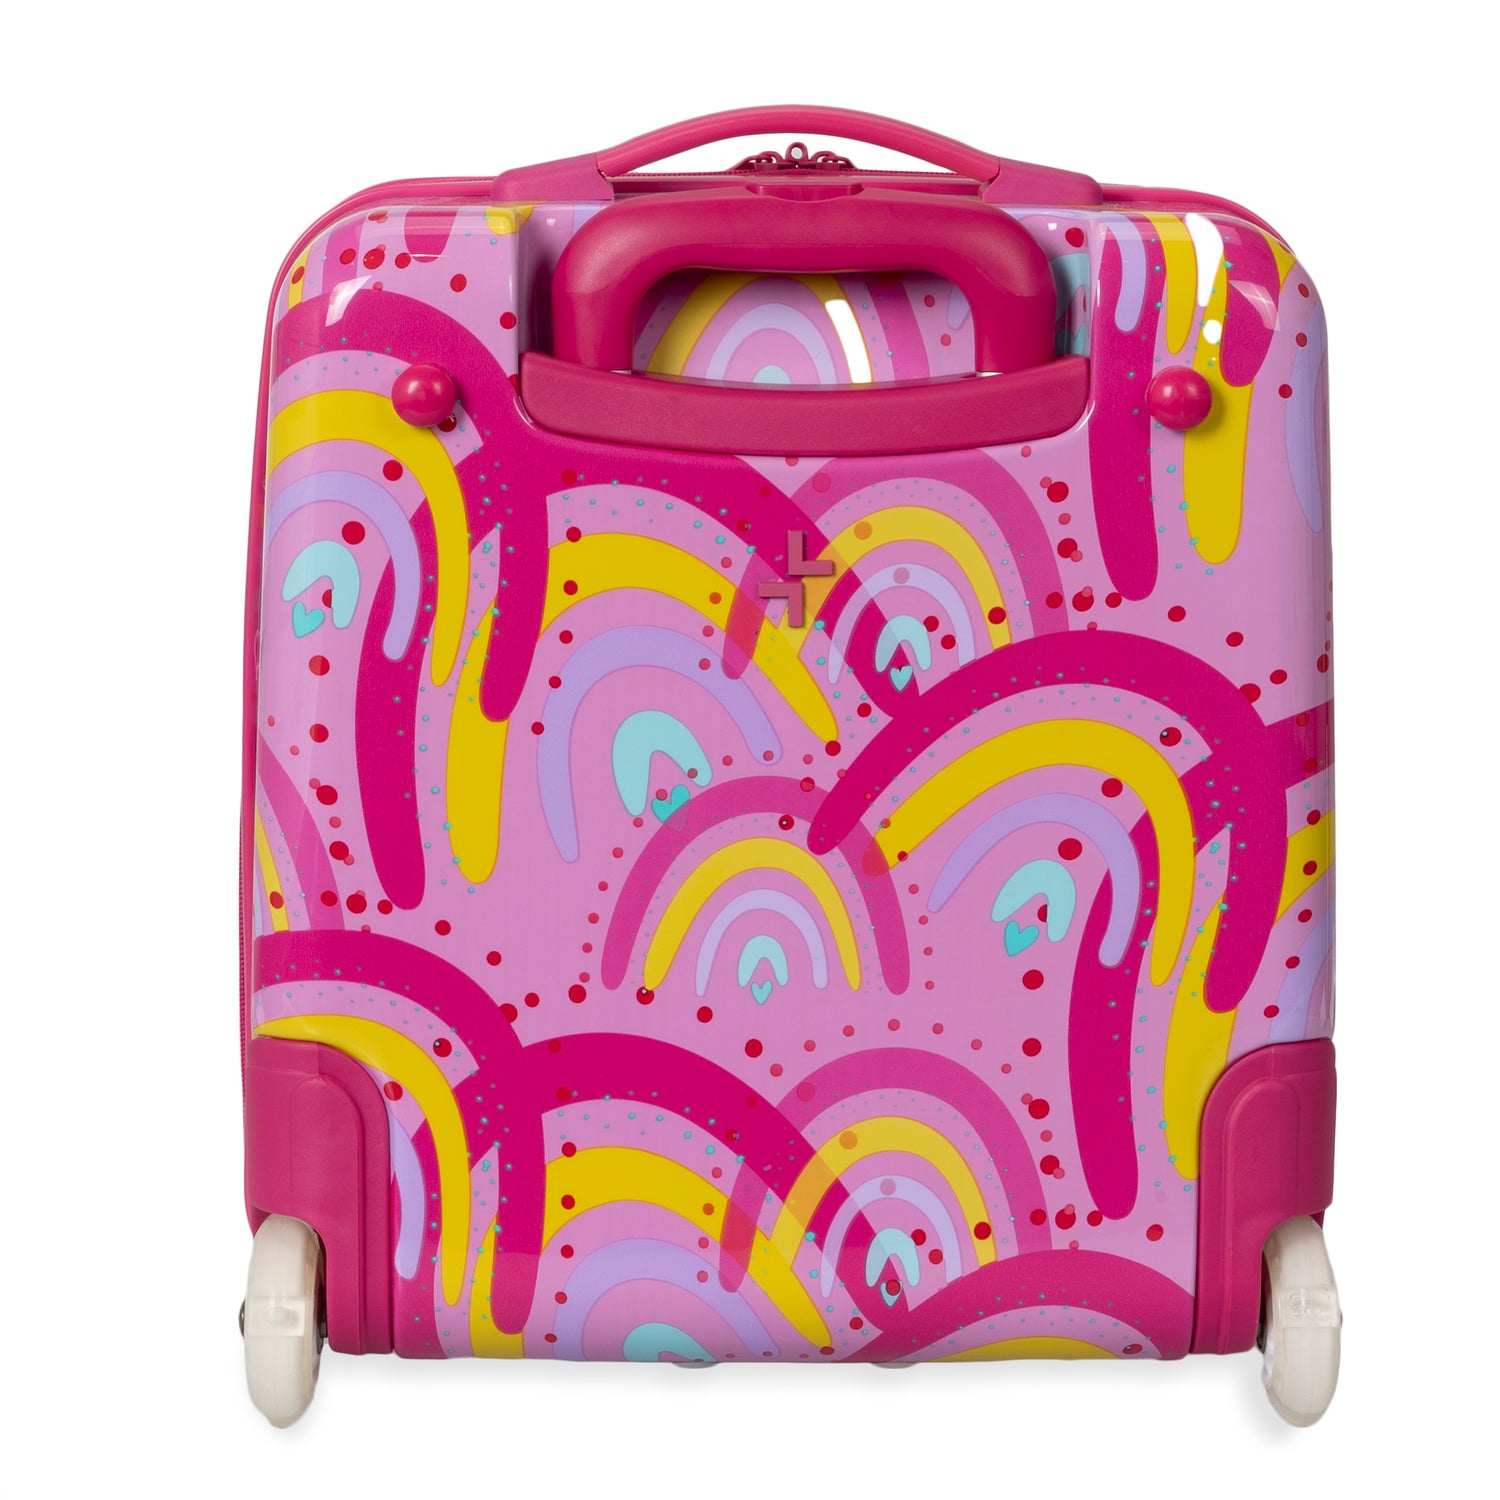 Backside of a pink and yellow, rainbow-print kids luggage designed by Triforce on a white background.